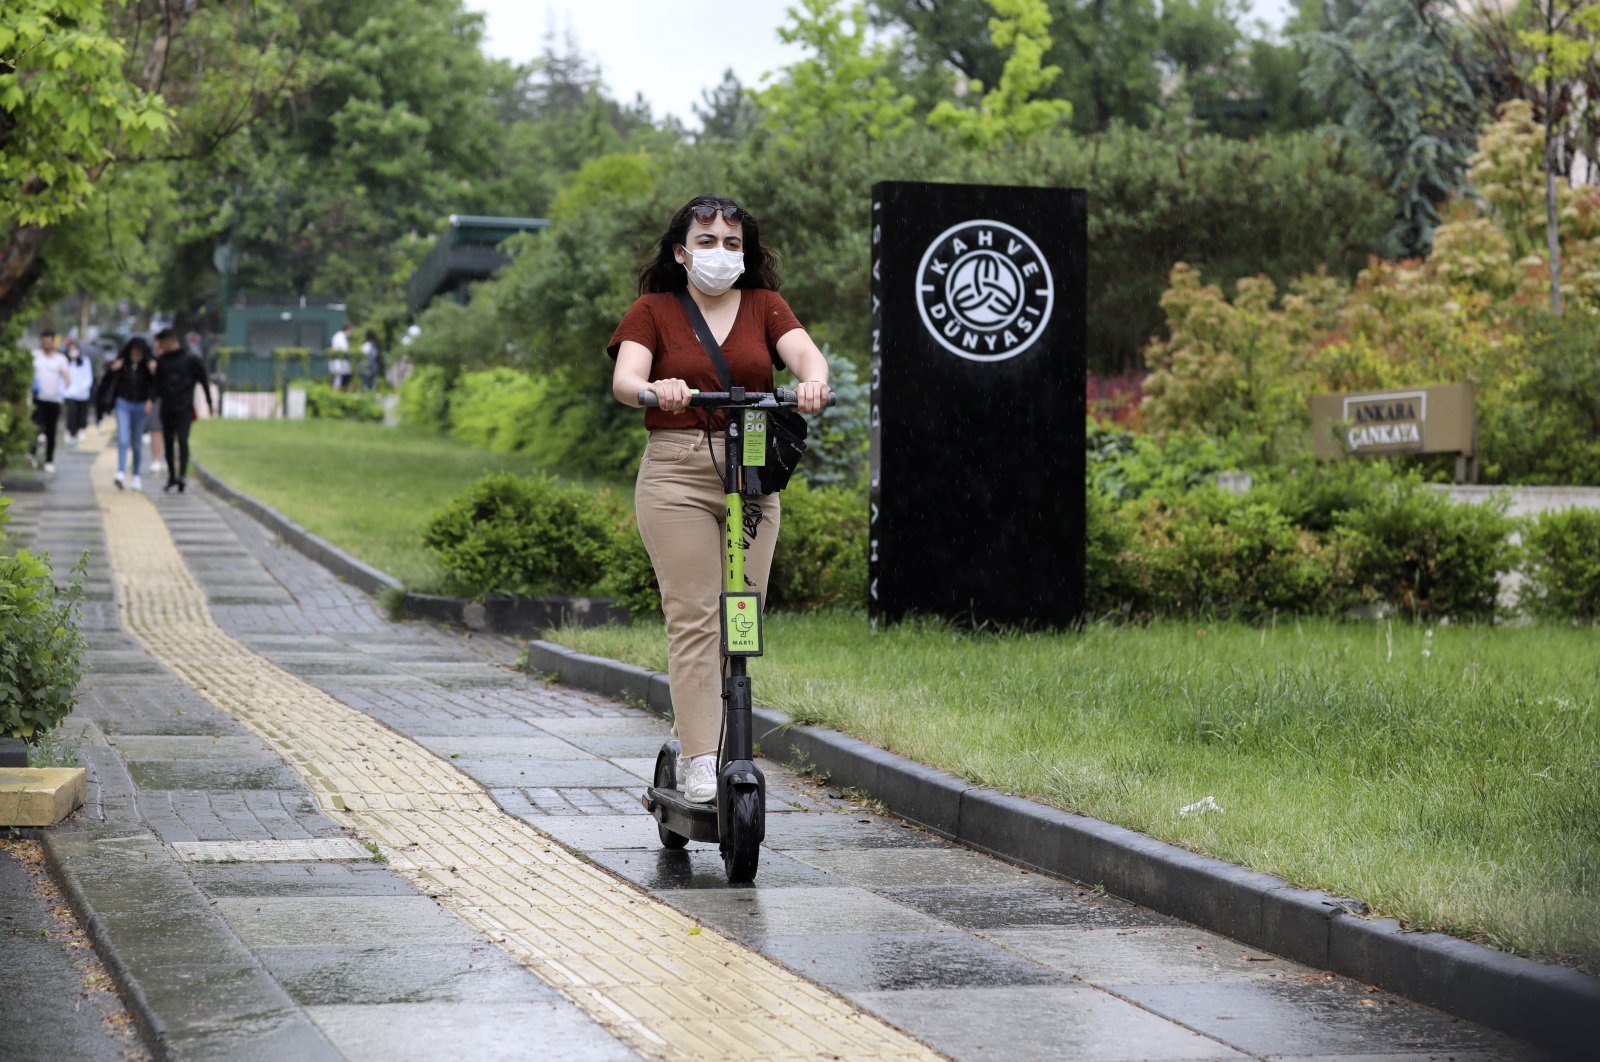 A woman wearing a face mask for protection against the new coronavirus, rides a scooter just hours before a four-day new curfew declared by the government in an attempt to control the spread of coronavirus, in Ankara, Turkey, Friday, May 22, 2020. (AP Photo)